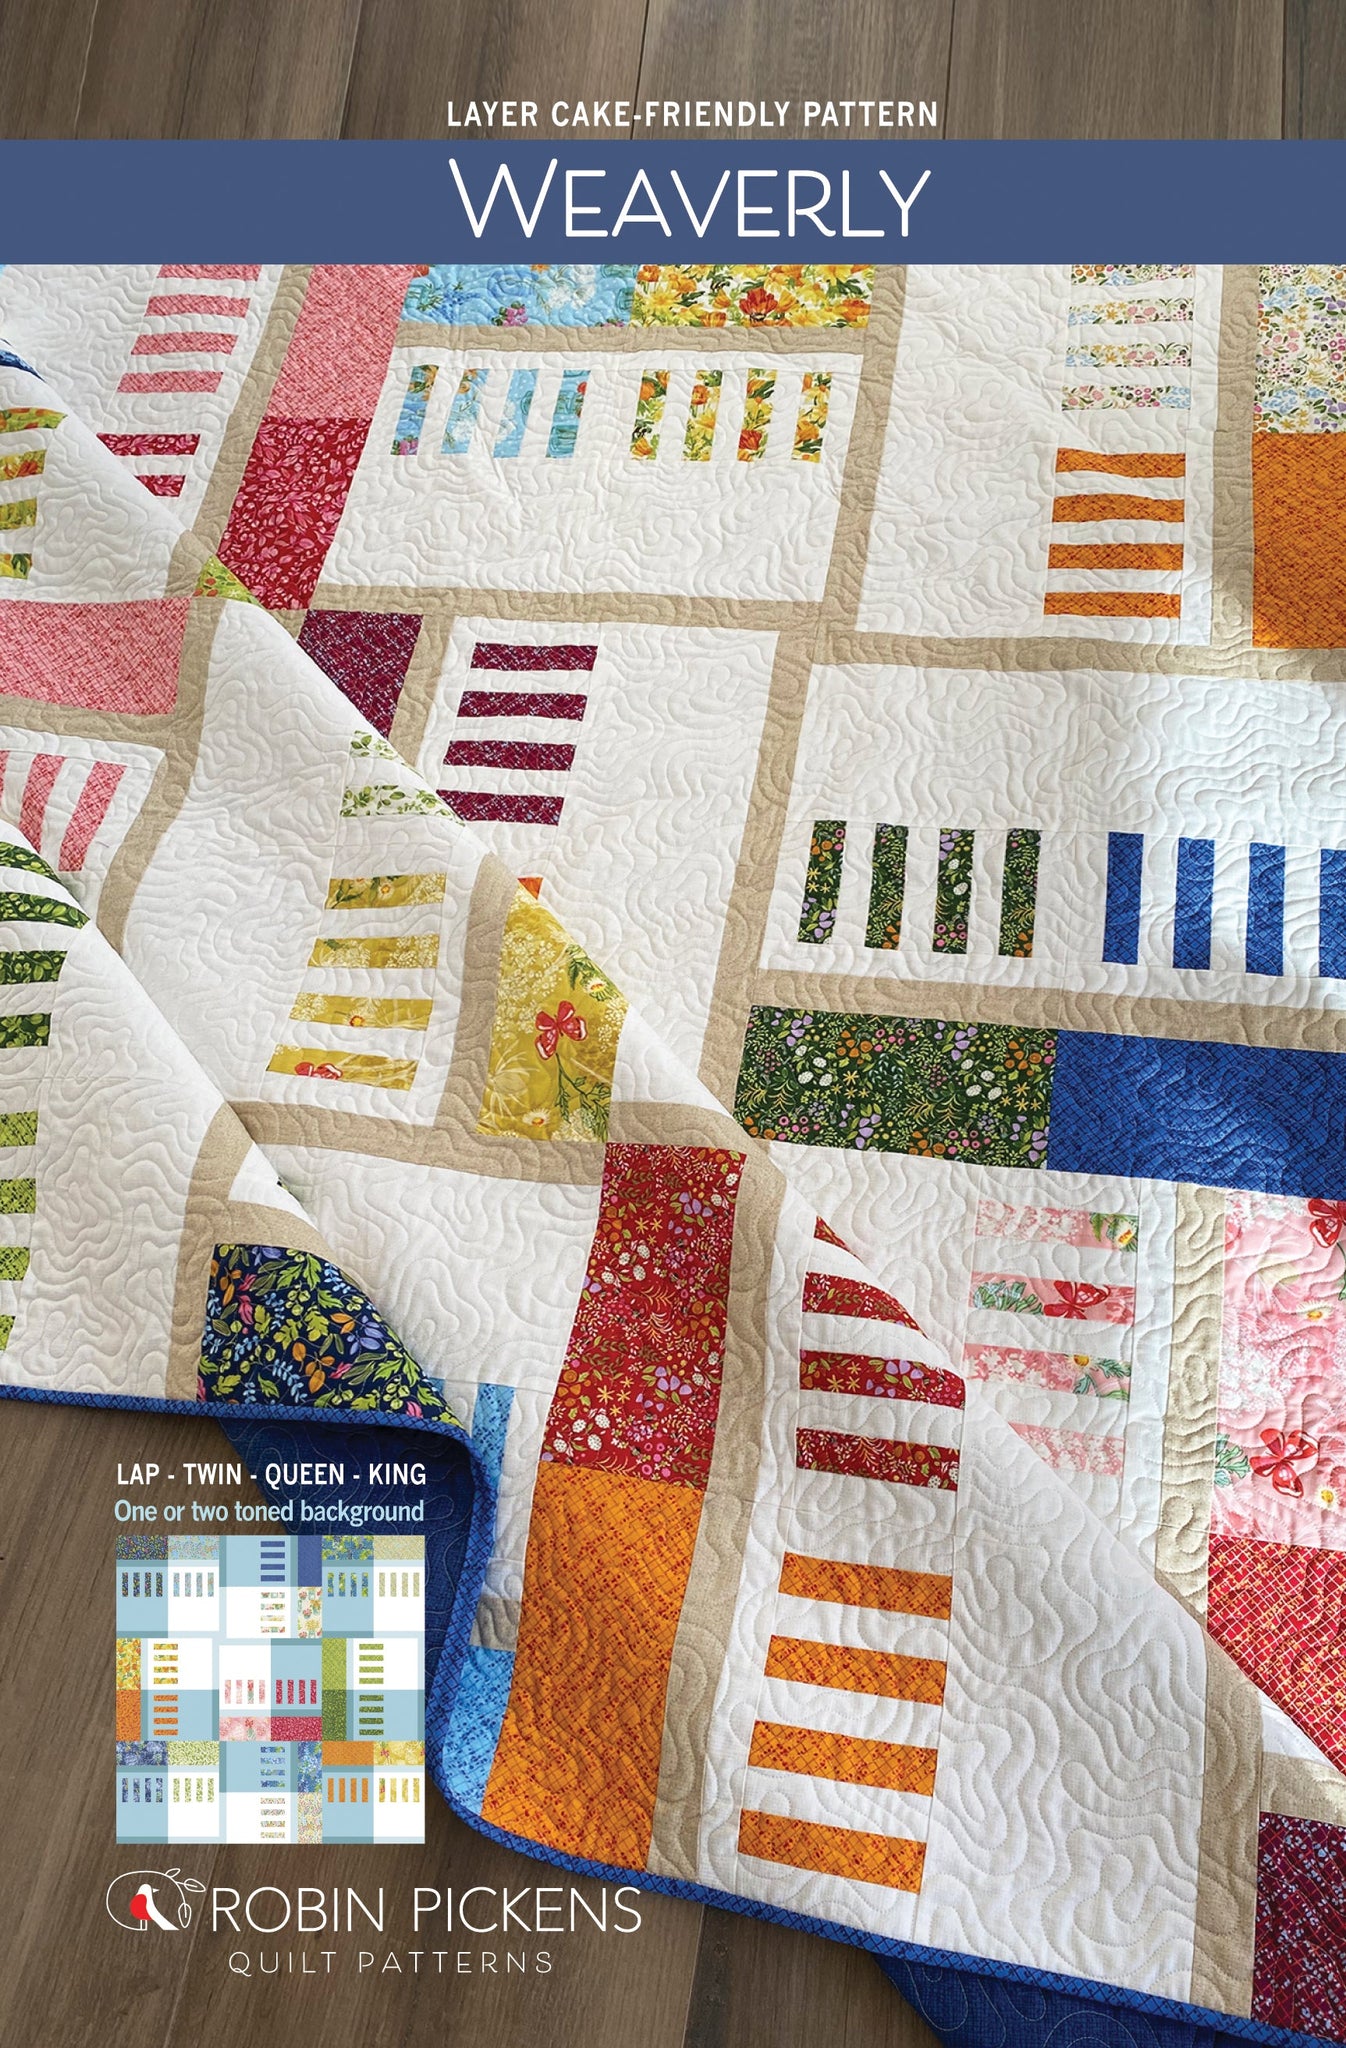 WEAVERLY Quilt Pattern PDF (digital download) by Robin Pickens in Lap, Twin, Queen and King sizes